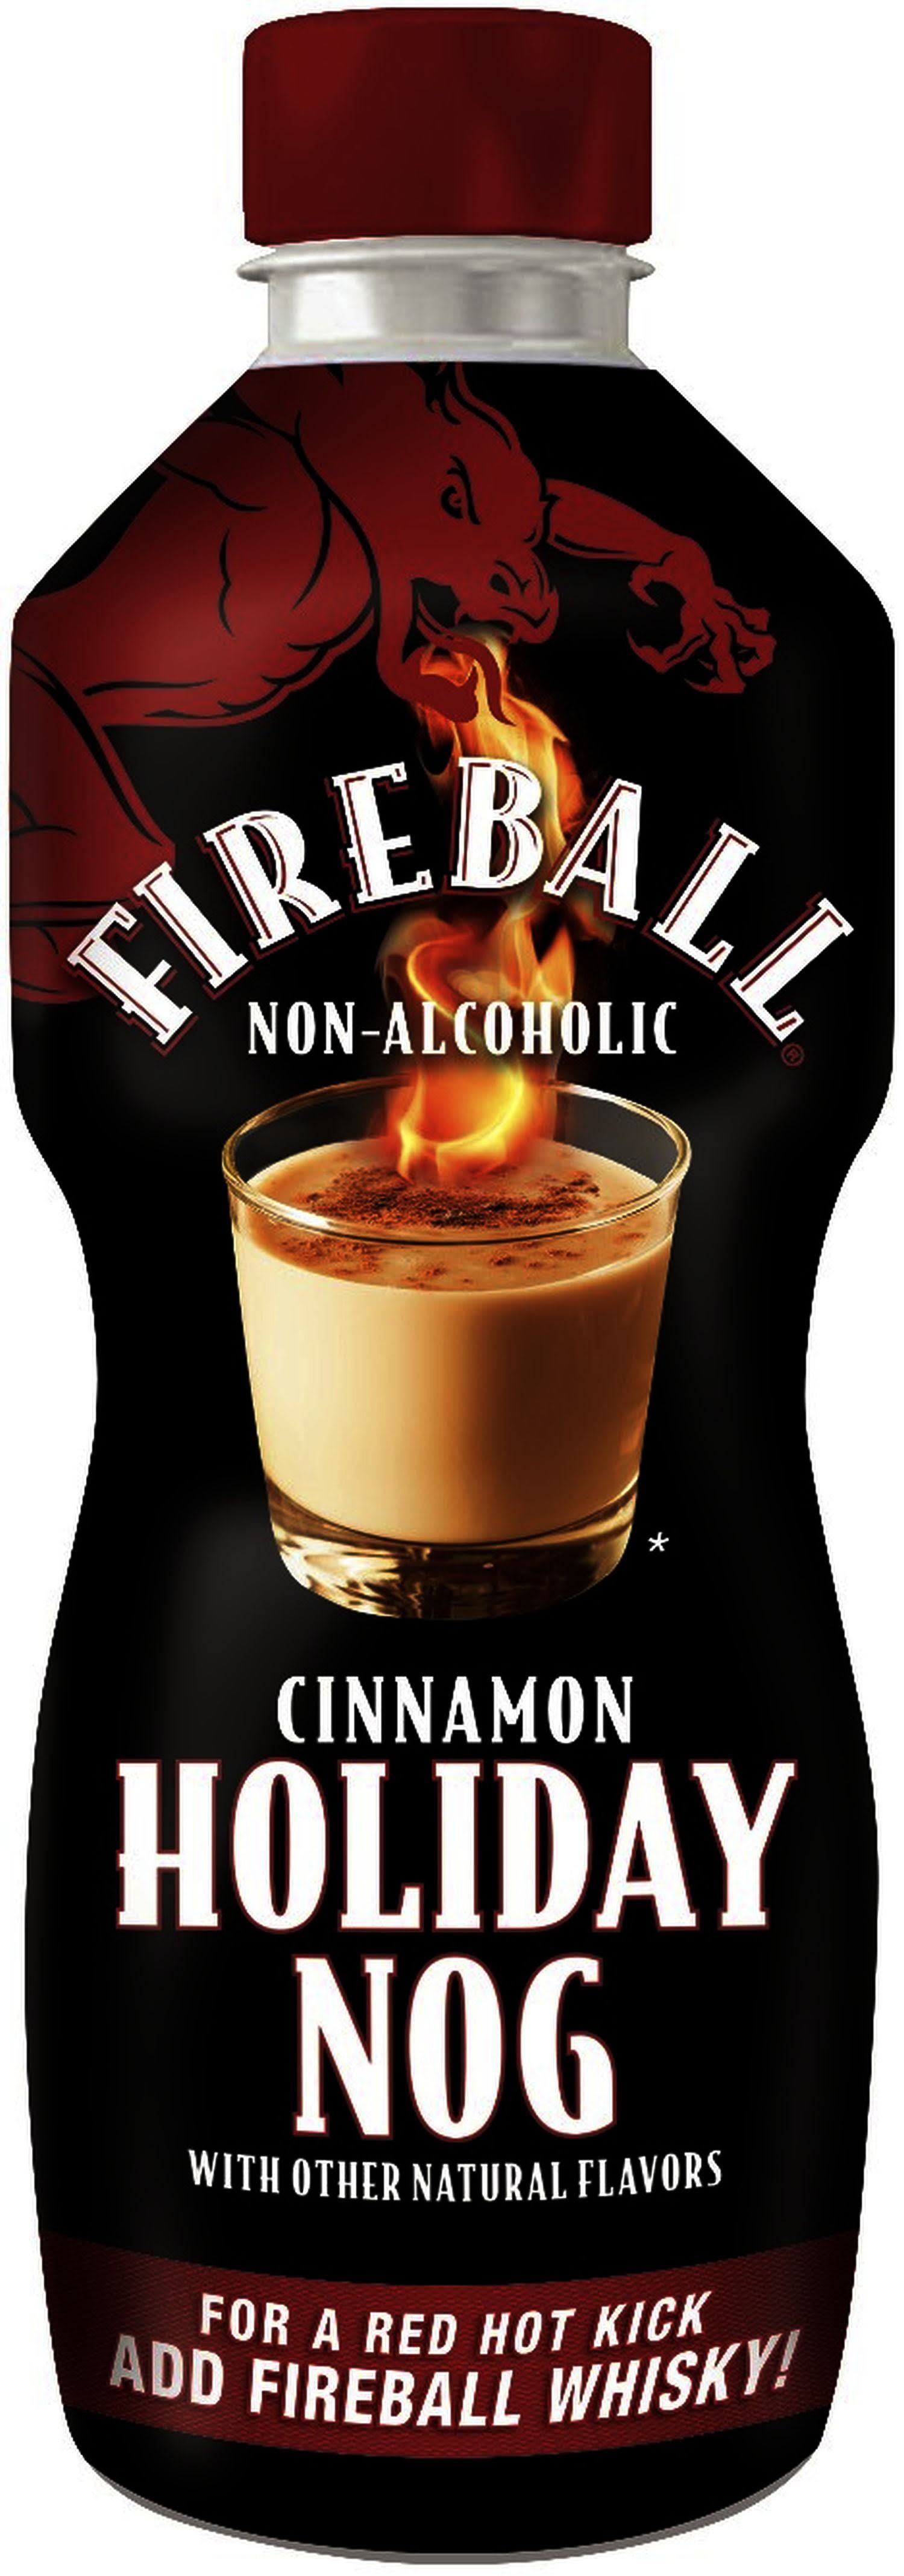 Fireball Cinnamon Holiday Nog Ultra-Pasteurized Dairy Beverage - 1 qt